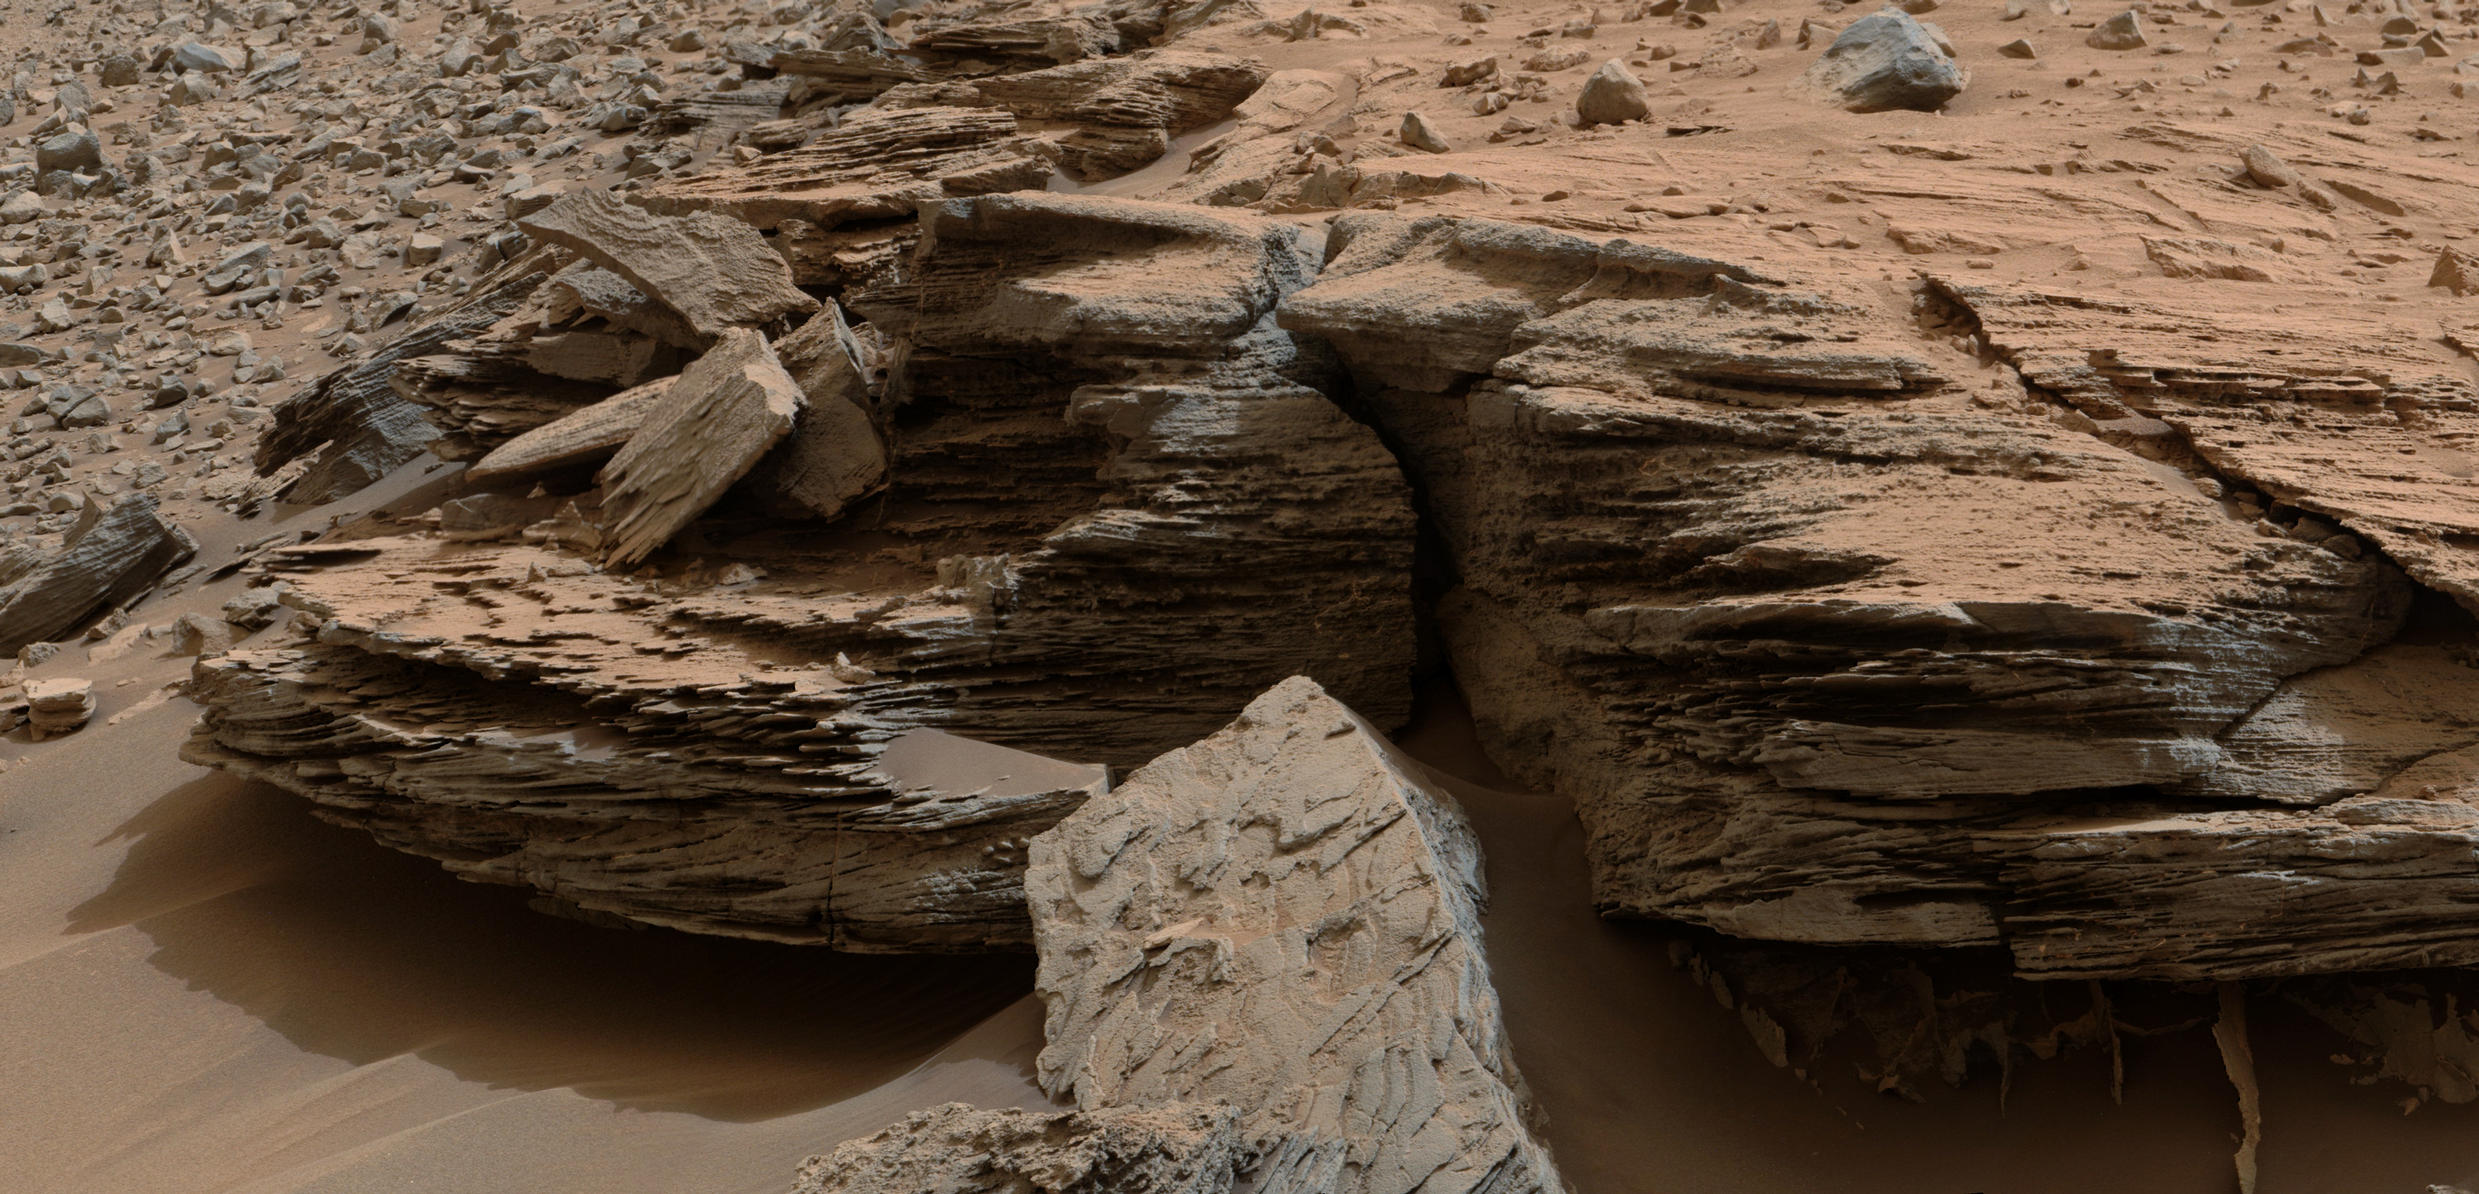 This view from the Mastcam on NASA's Curiosity Mars rover shows an example of cross-bedding that results from water  passing over a loose bed of sediment. It was taken Nov. 2, 2014, at a target called "Whale Rock" within the "Pahrump Hills" outcrop at the base of Mount Sharp.